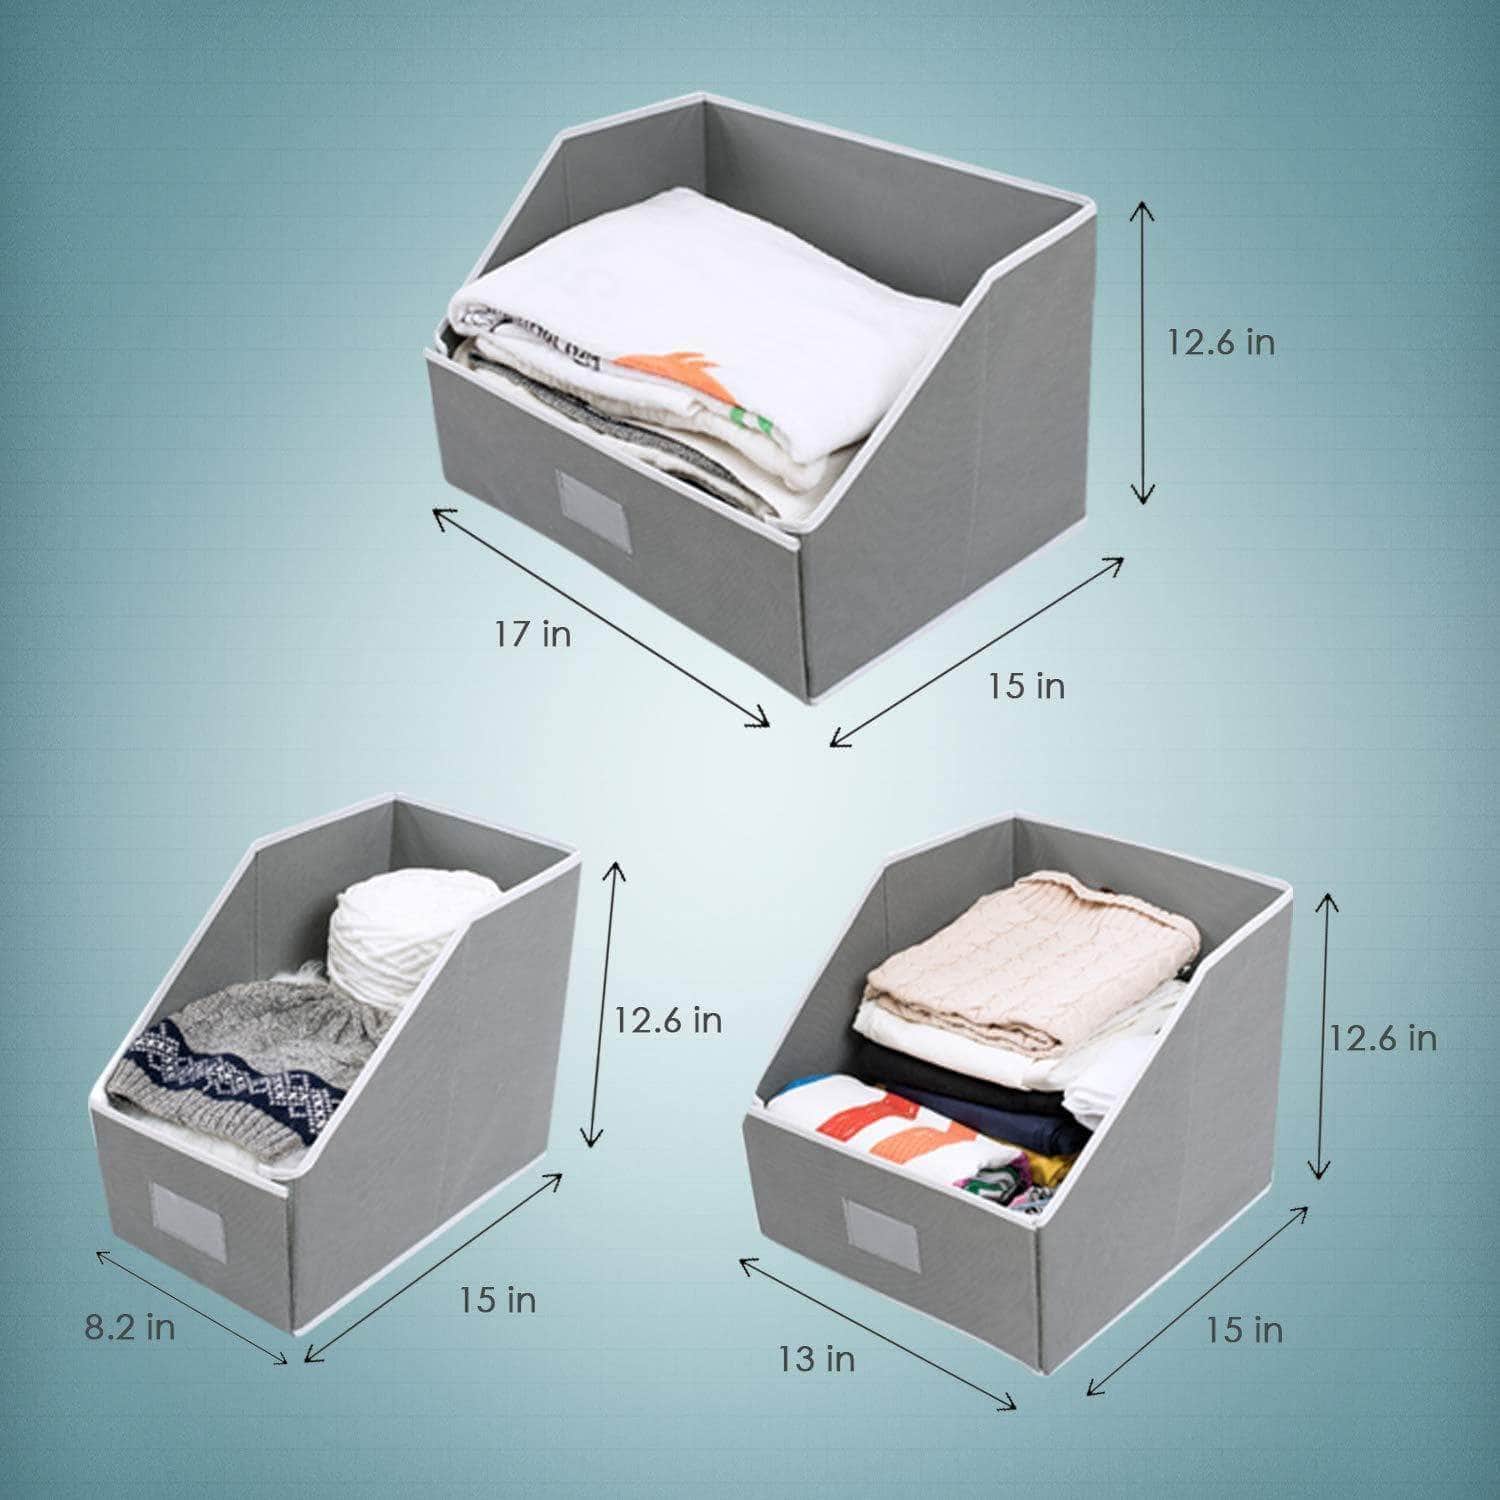 Save woffit linen closet storage organizers set of 3 foldable baskets to organize your sheets towels washclothes blankets clothing sweaters etc 100 organic fabric bins